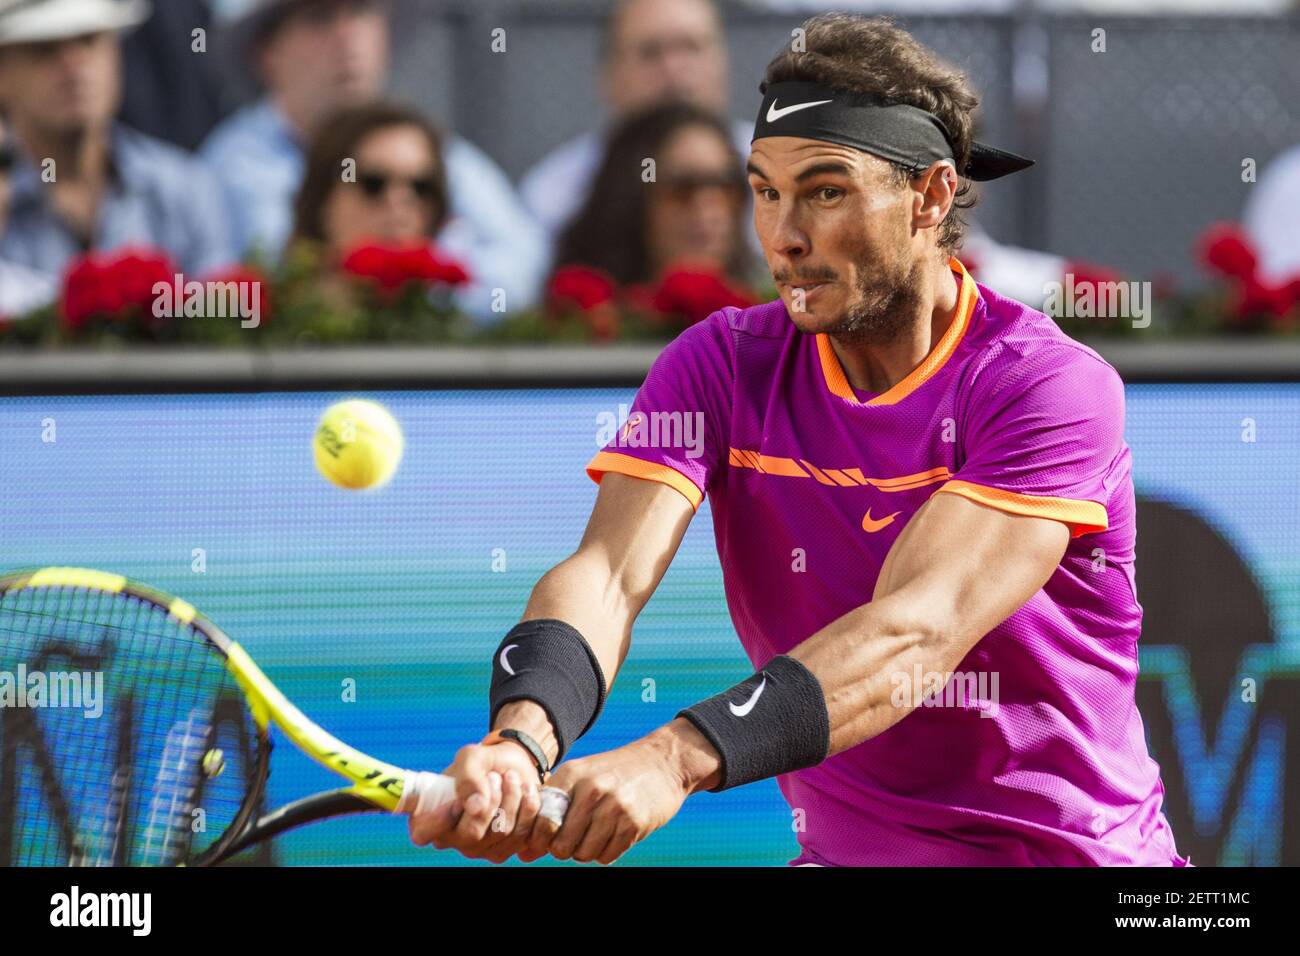 Rafael Nadal beat Dominic Thiem 7-6 (10-8) 6-4 to win his fifth Madrid Open  title on May 14, 2017. Rafa Nadal during the ATP final of Mutua Madrid Open  Tennis 2017 at